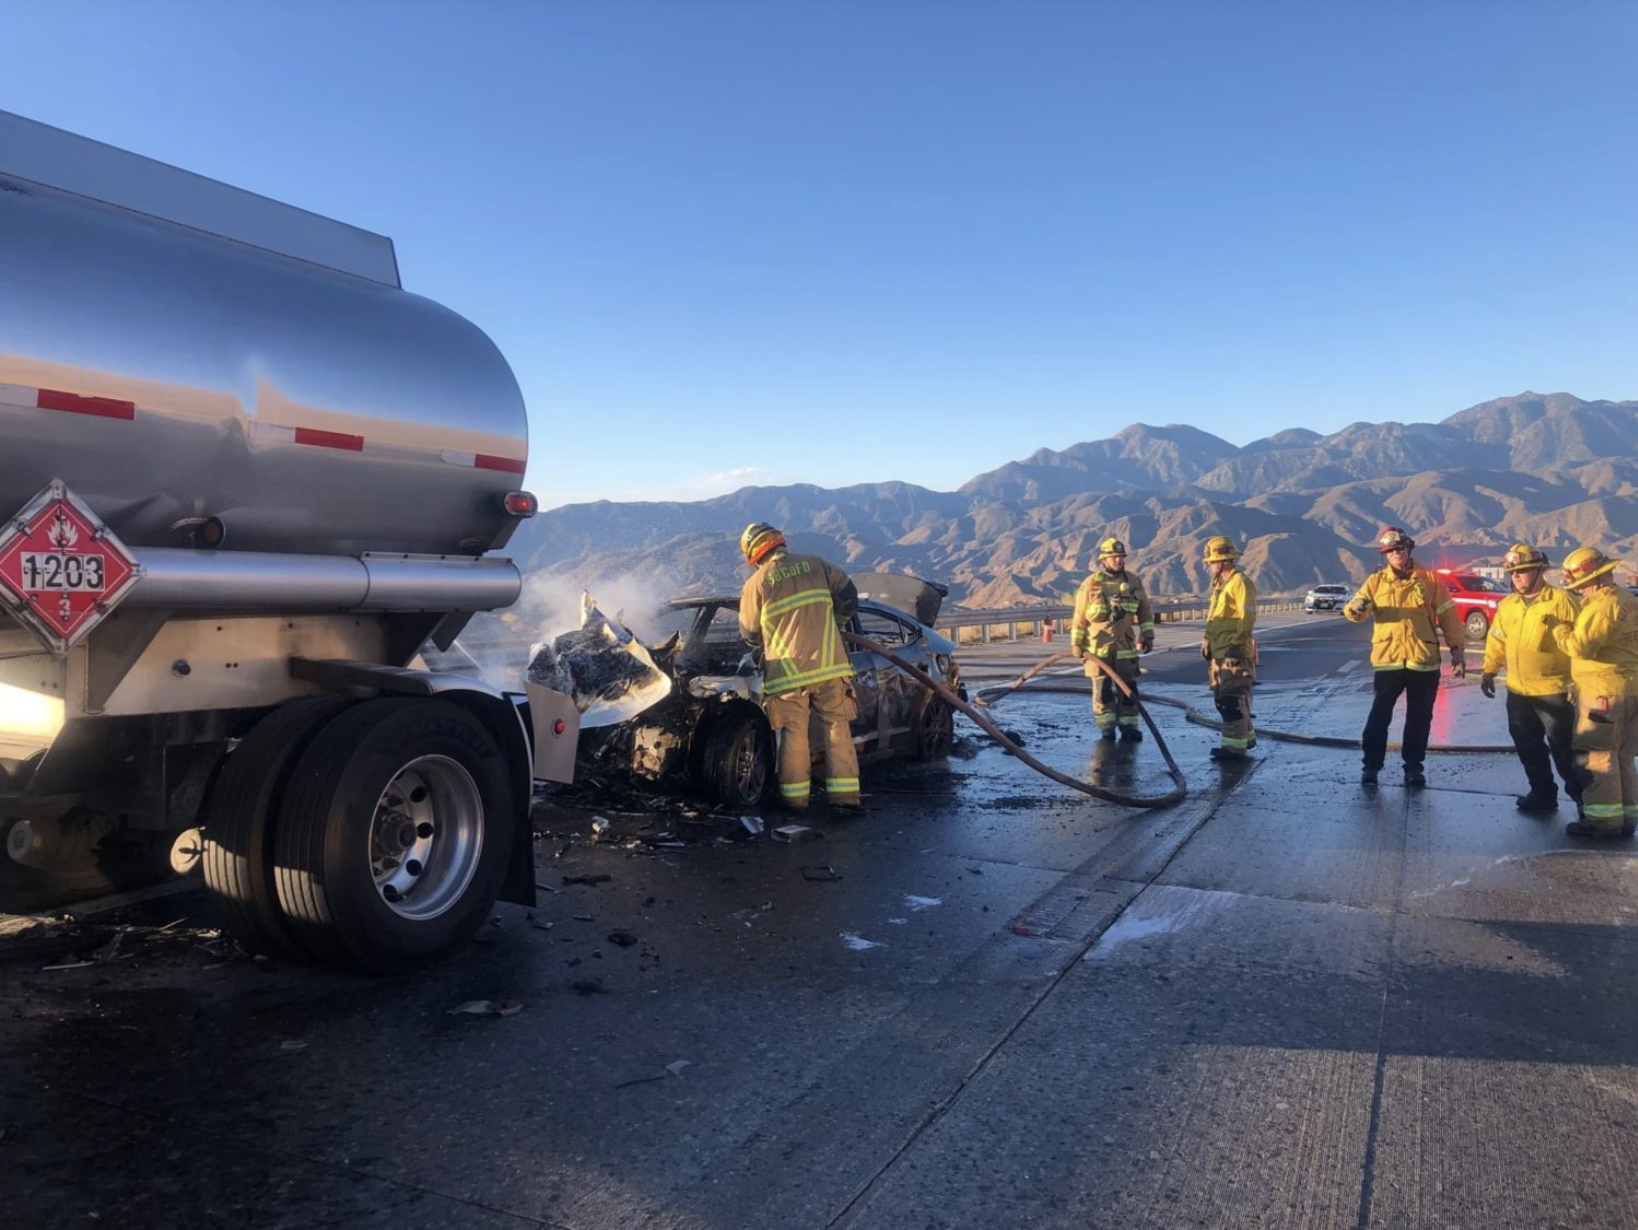 An image showing a roadside vehicle accident where a small passenger car has driven into the rear end of a heavy freight tanker truck. Around the passenger car are firefighters working to extinguish the flames from the front of the vehicle with a fire hose.